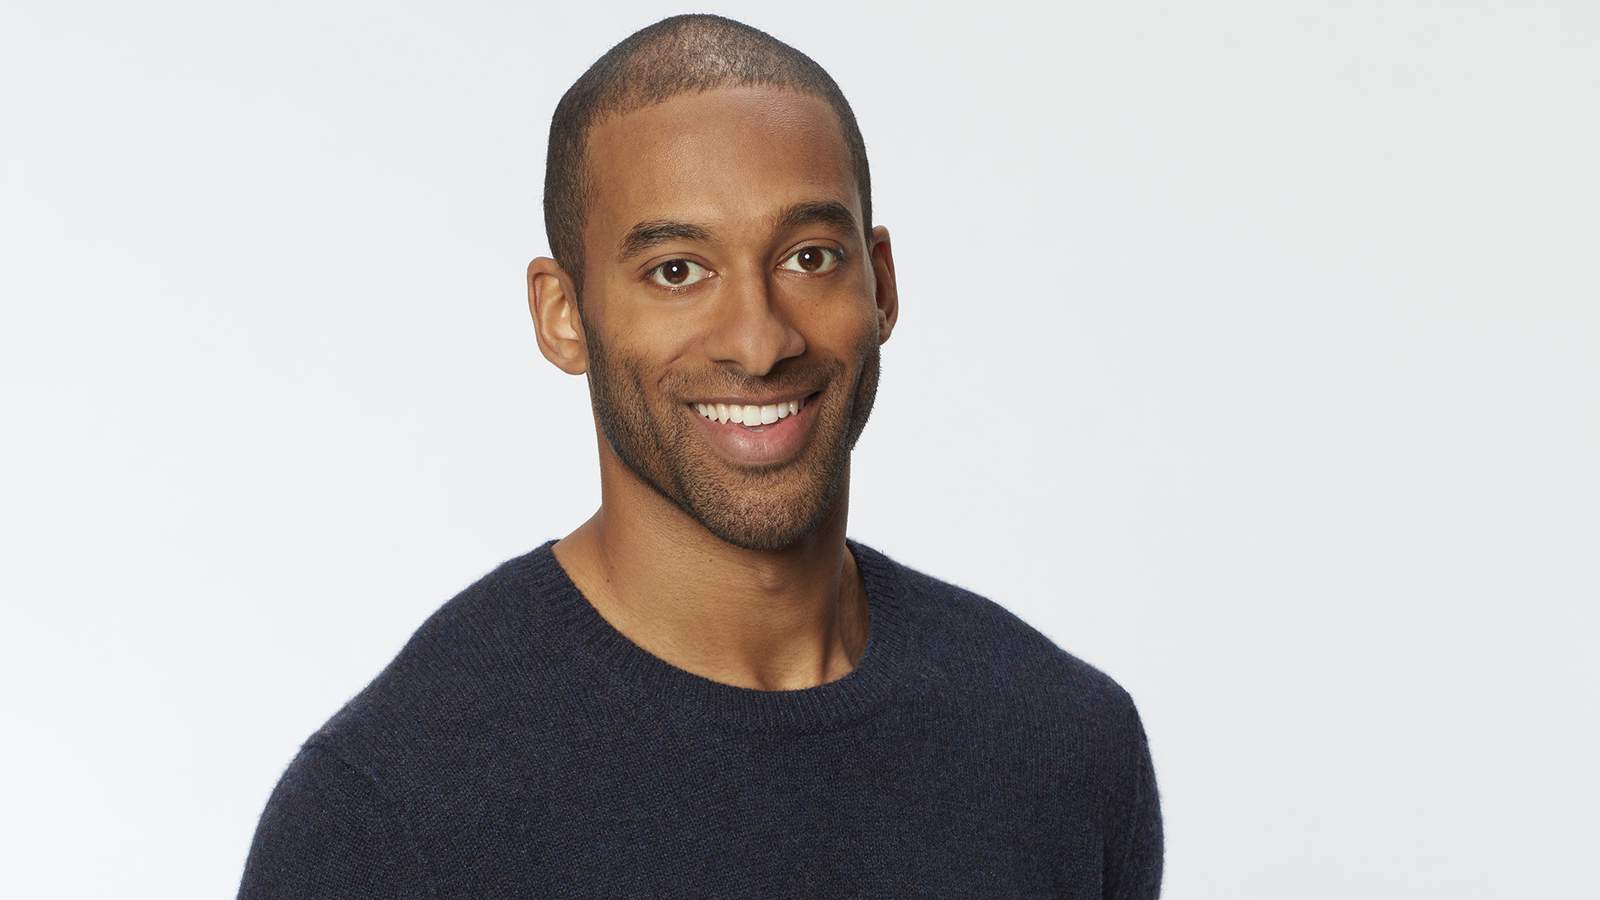 ABC casts first black Bachelor following outcry for diversity